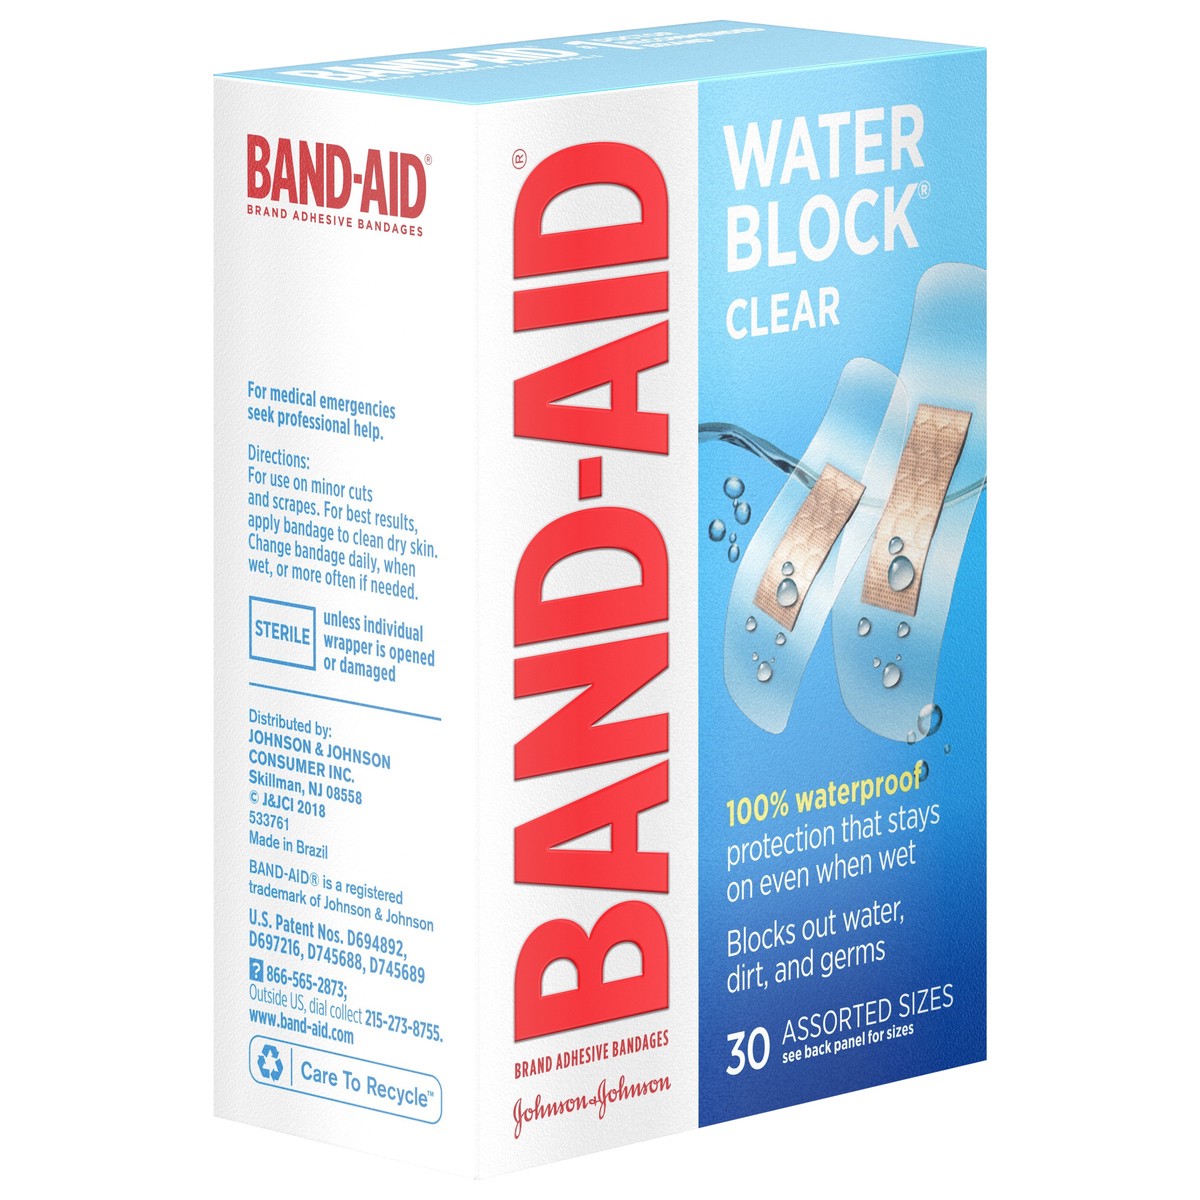 slide 8 of 8, BAND-AID Water Block Clear Waterproof Sterile Adhesive Bandages for First-Aid Care of Minor Wounds, Cuts, Scrapes & Burns, Quilt-Aid Pad to Cushion Wounds, Assorted Sizes, 30 ct, 30 ct